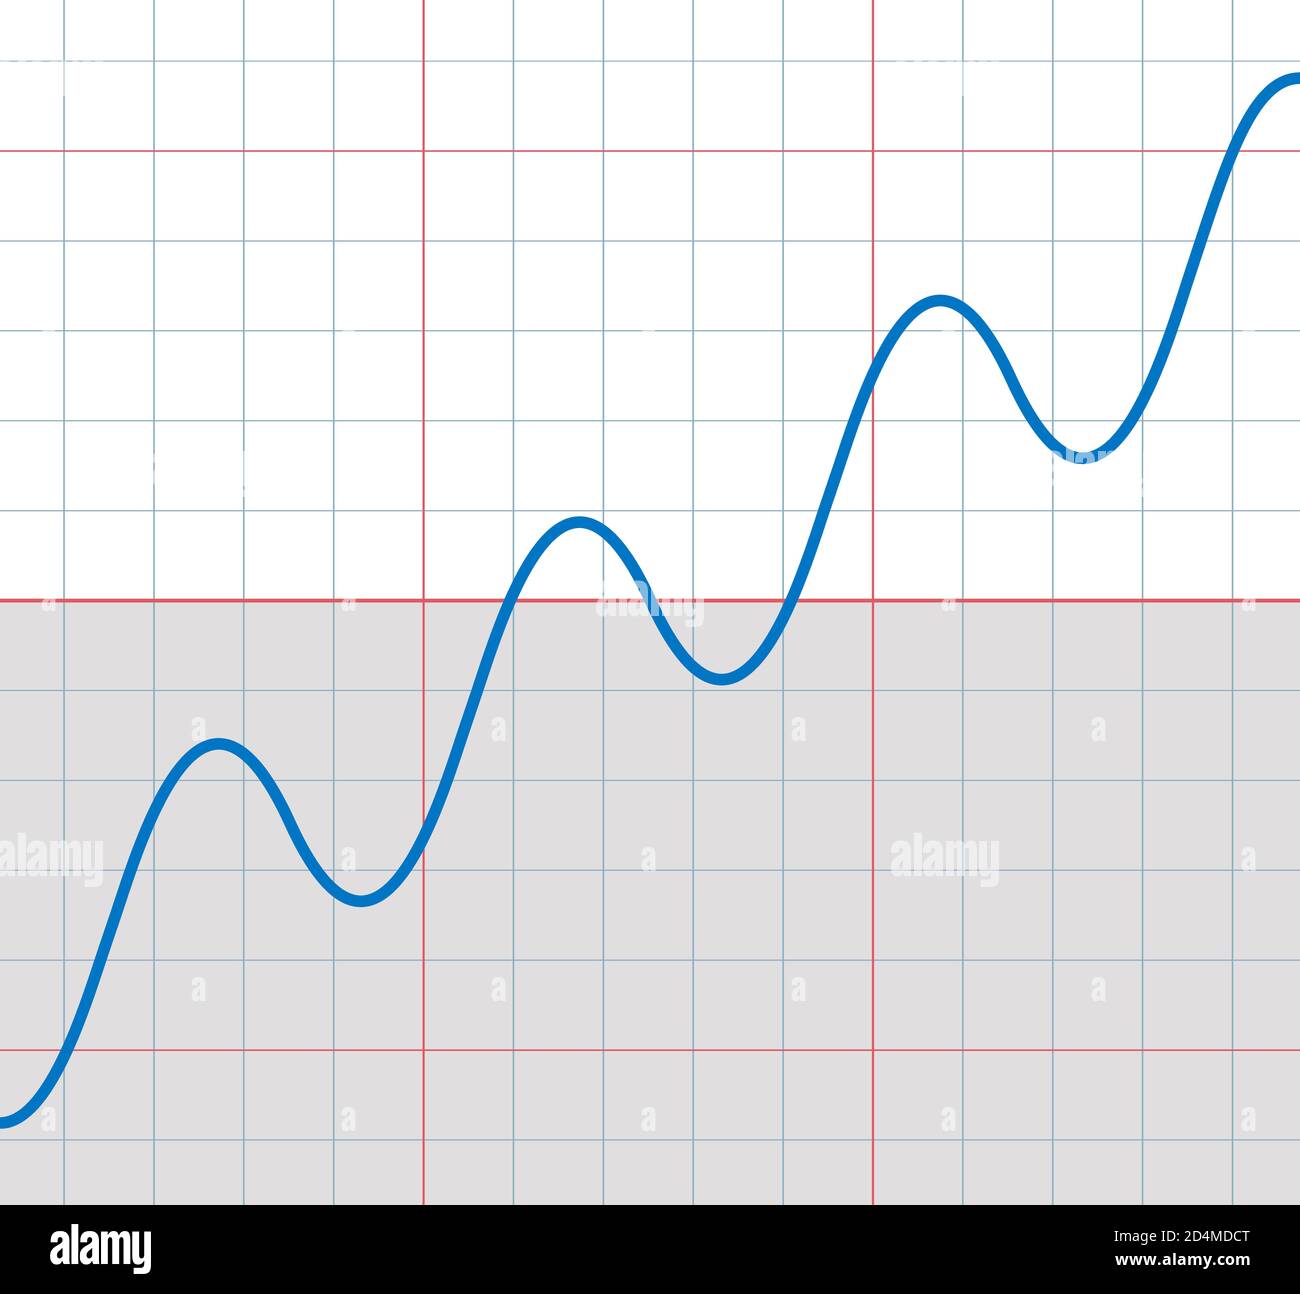 Rising sine curve with some small sinusoids falling and rising - symbolic for upward trend with temporary deceptively decreasing phases. Stock Photo